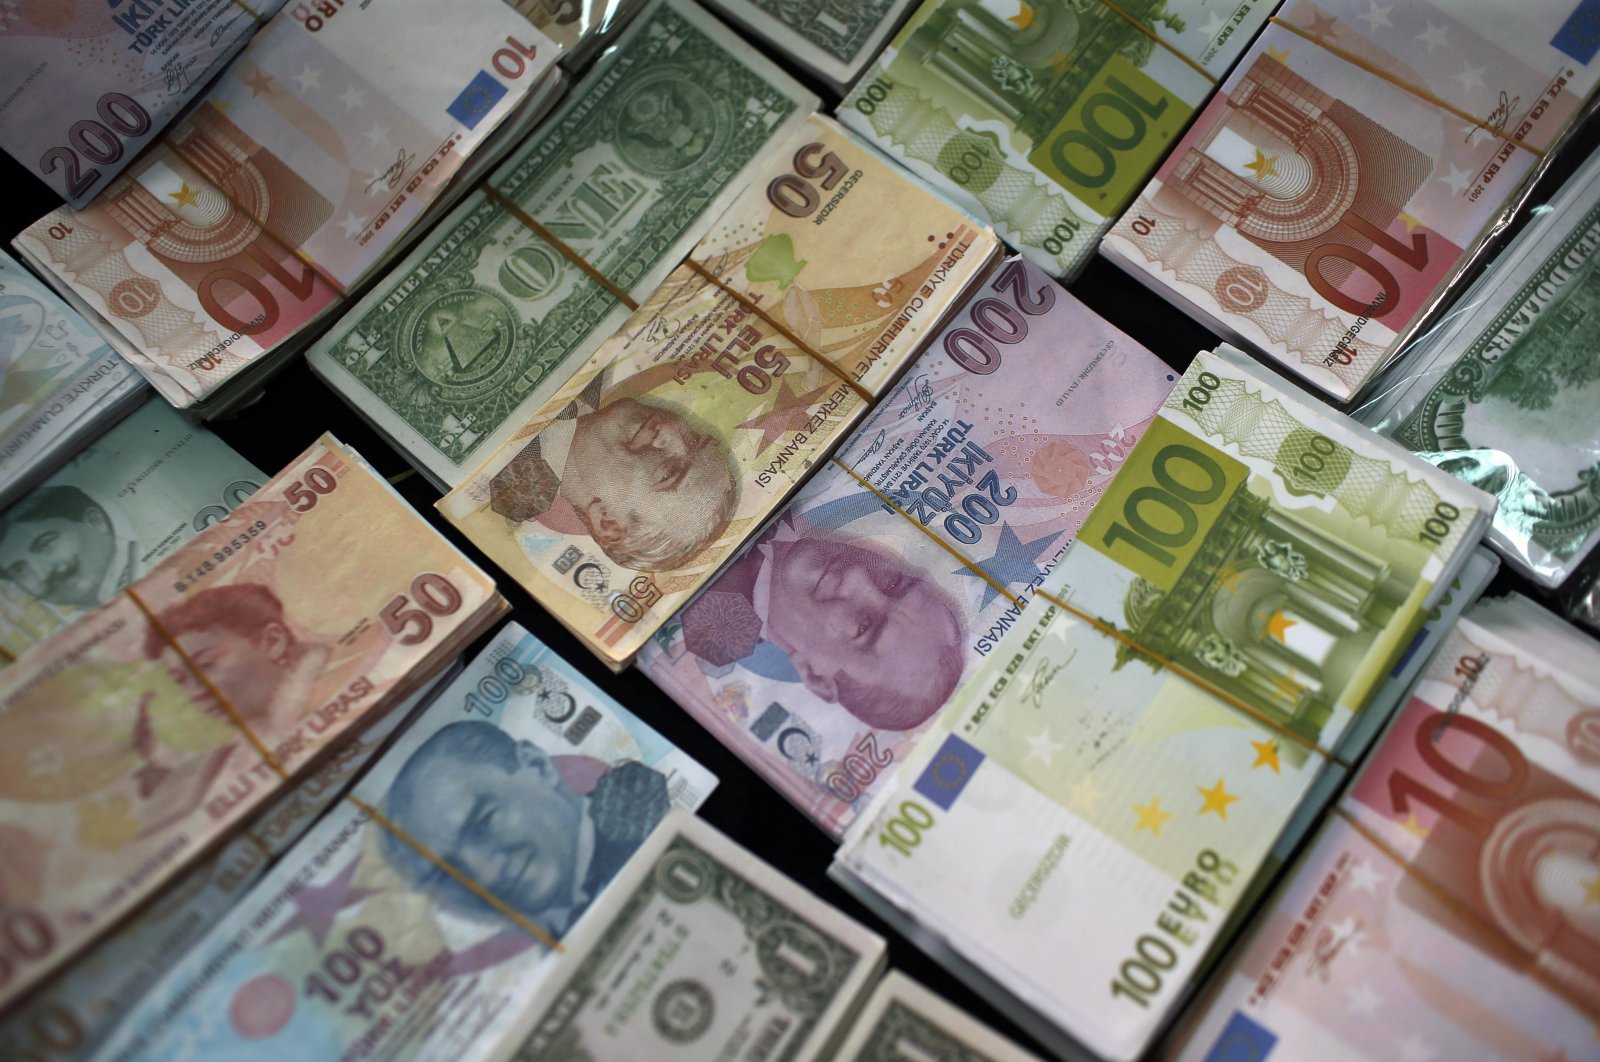 Turkish liras, euros and U.S. dollars are stacked at a currency exchange office in Istanbul, Turkey, June 8, 2015. (AP File Photo)